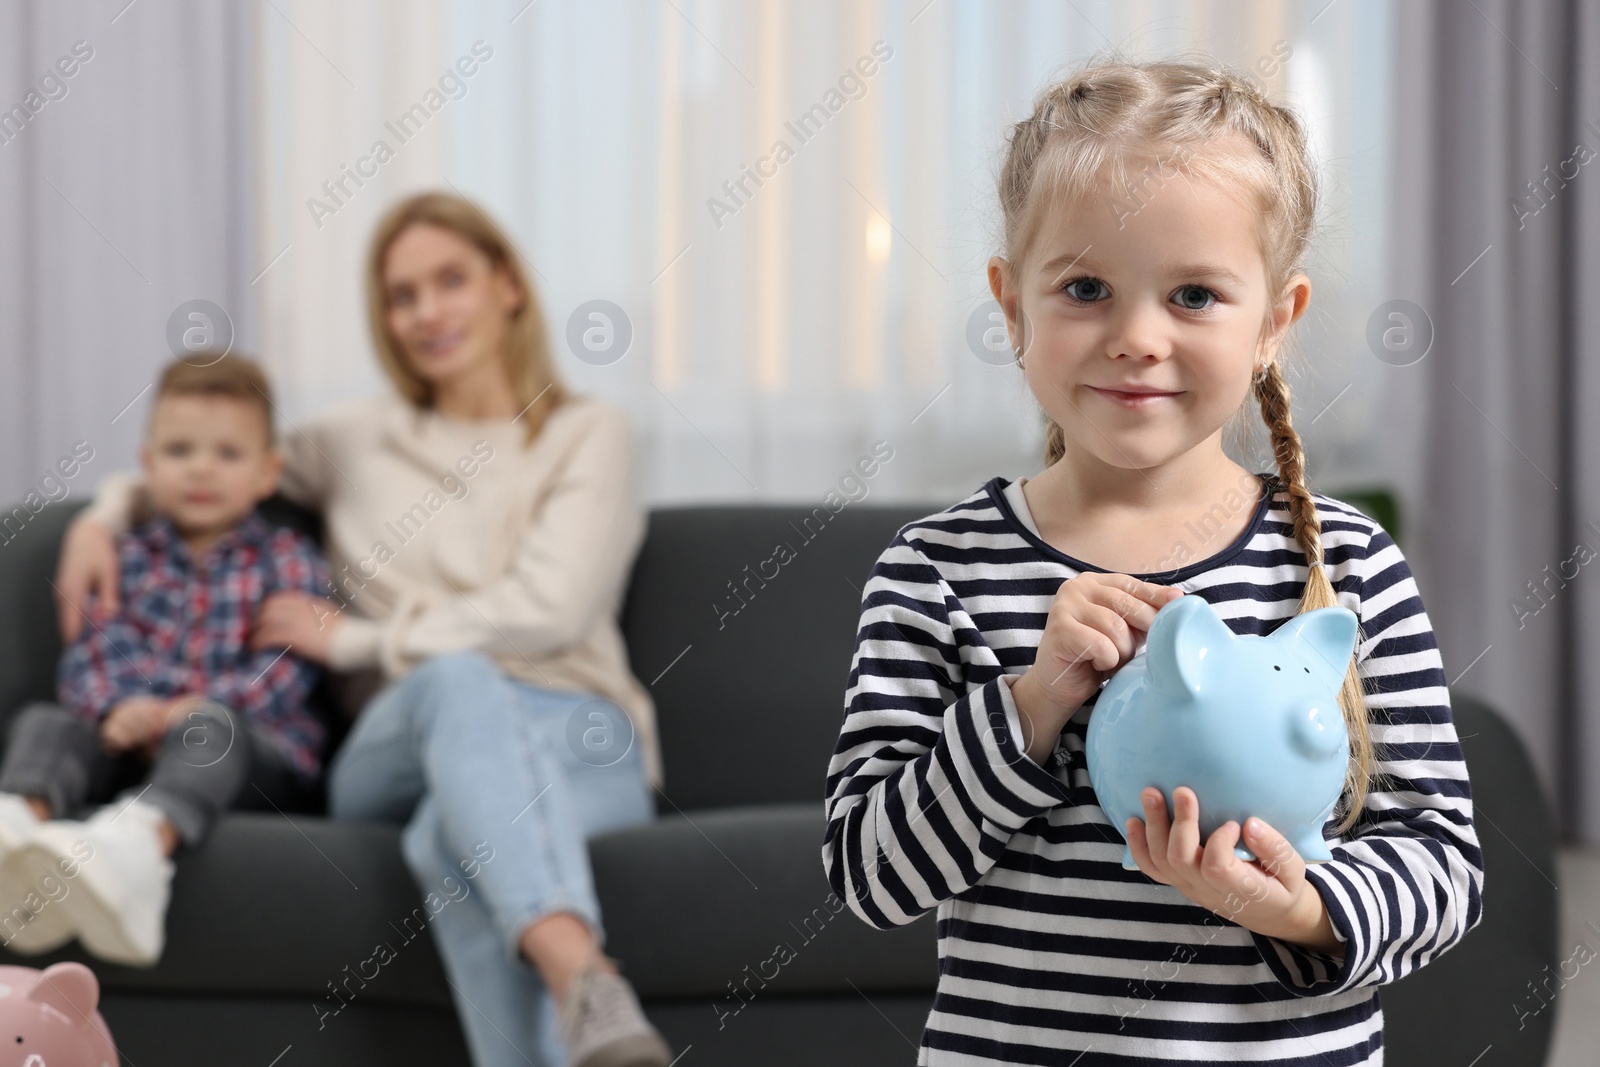 Photo of Family budget. Little girl putting coin into piggy bank while her mother and brother sitting on sofa at home, selective focus